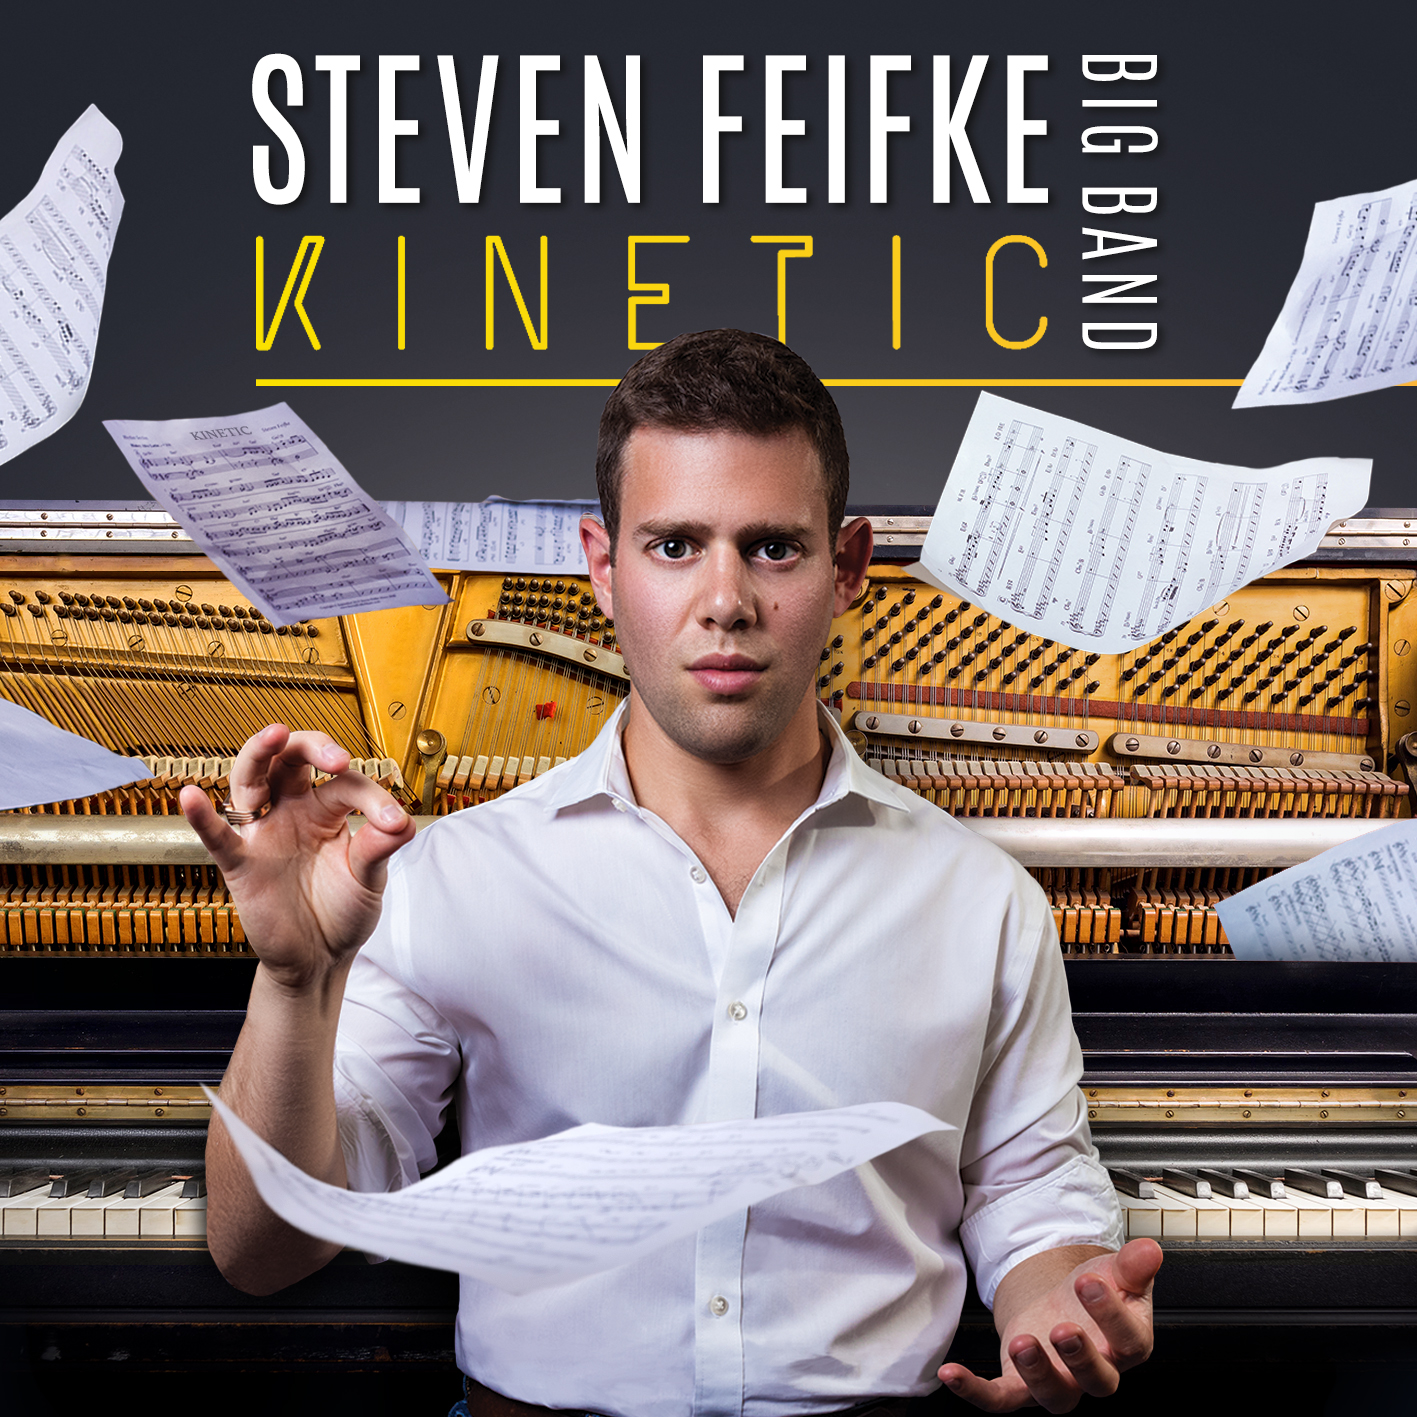 Steven Feifke Big Band Kinetic album cover - Steven in front of piano with floating sheet music